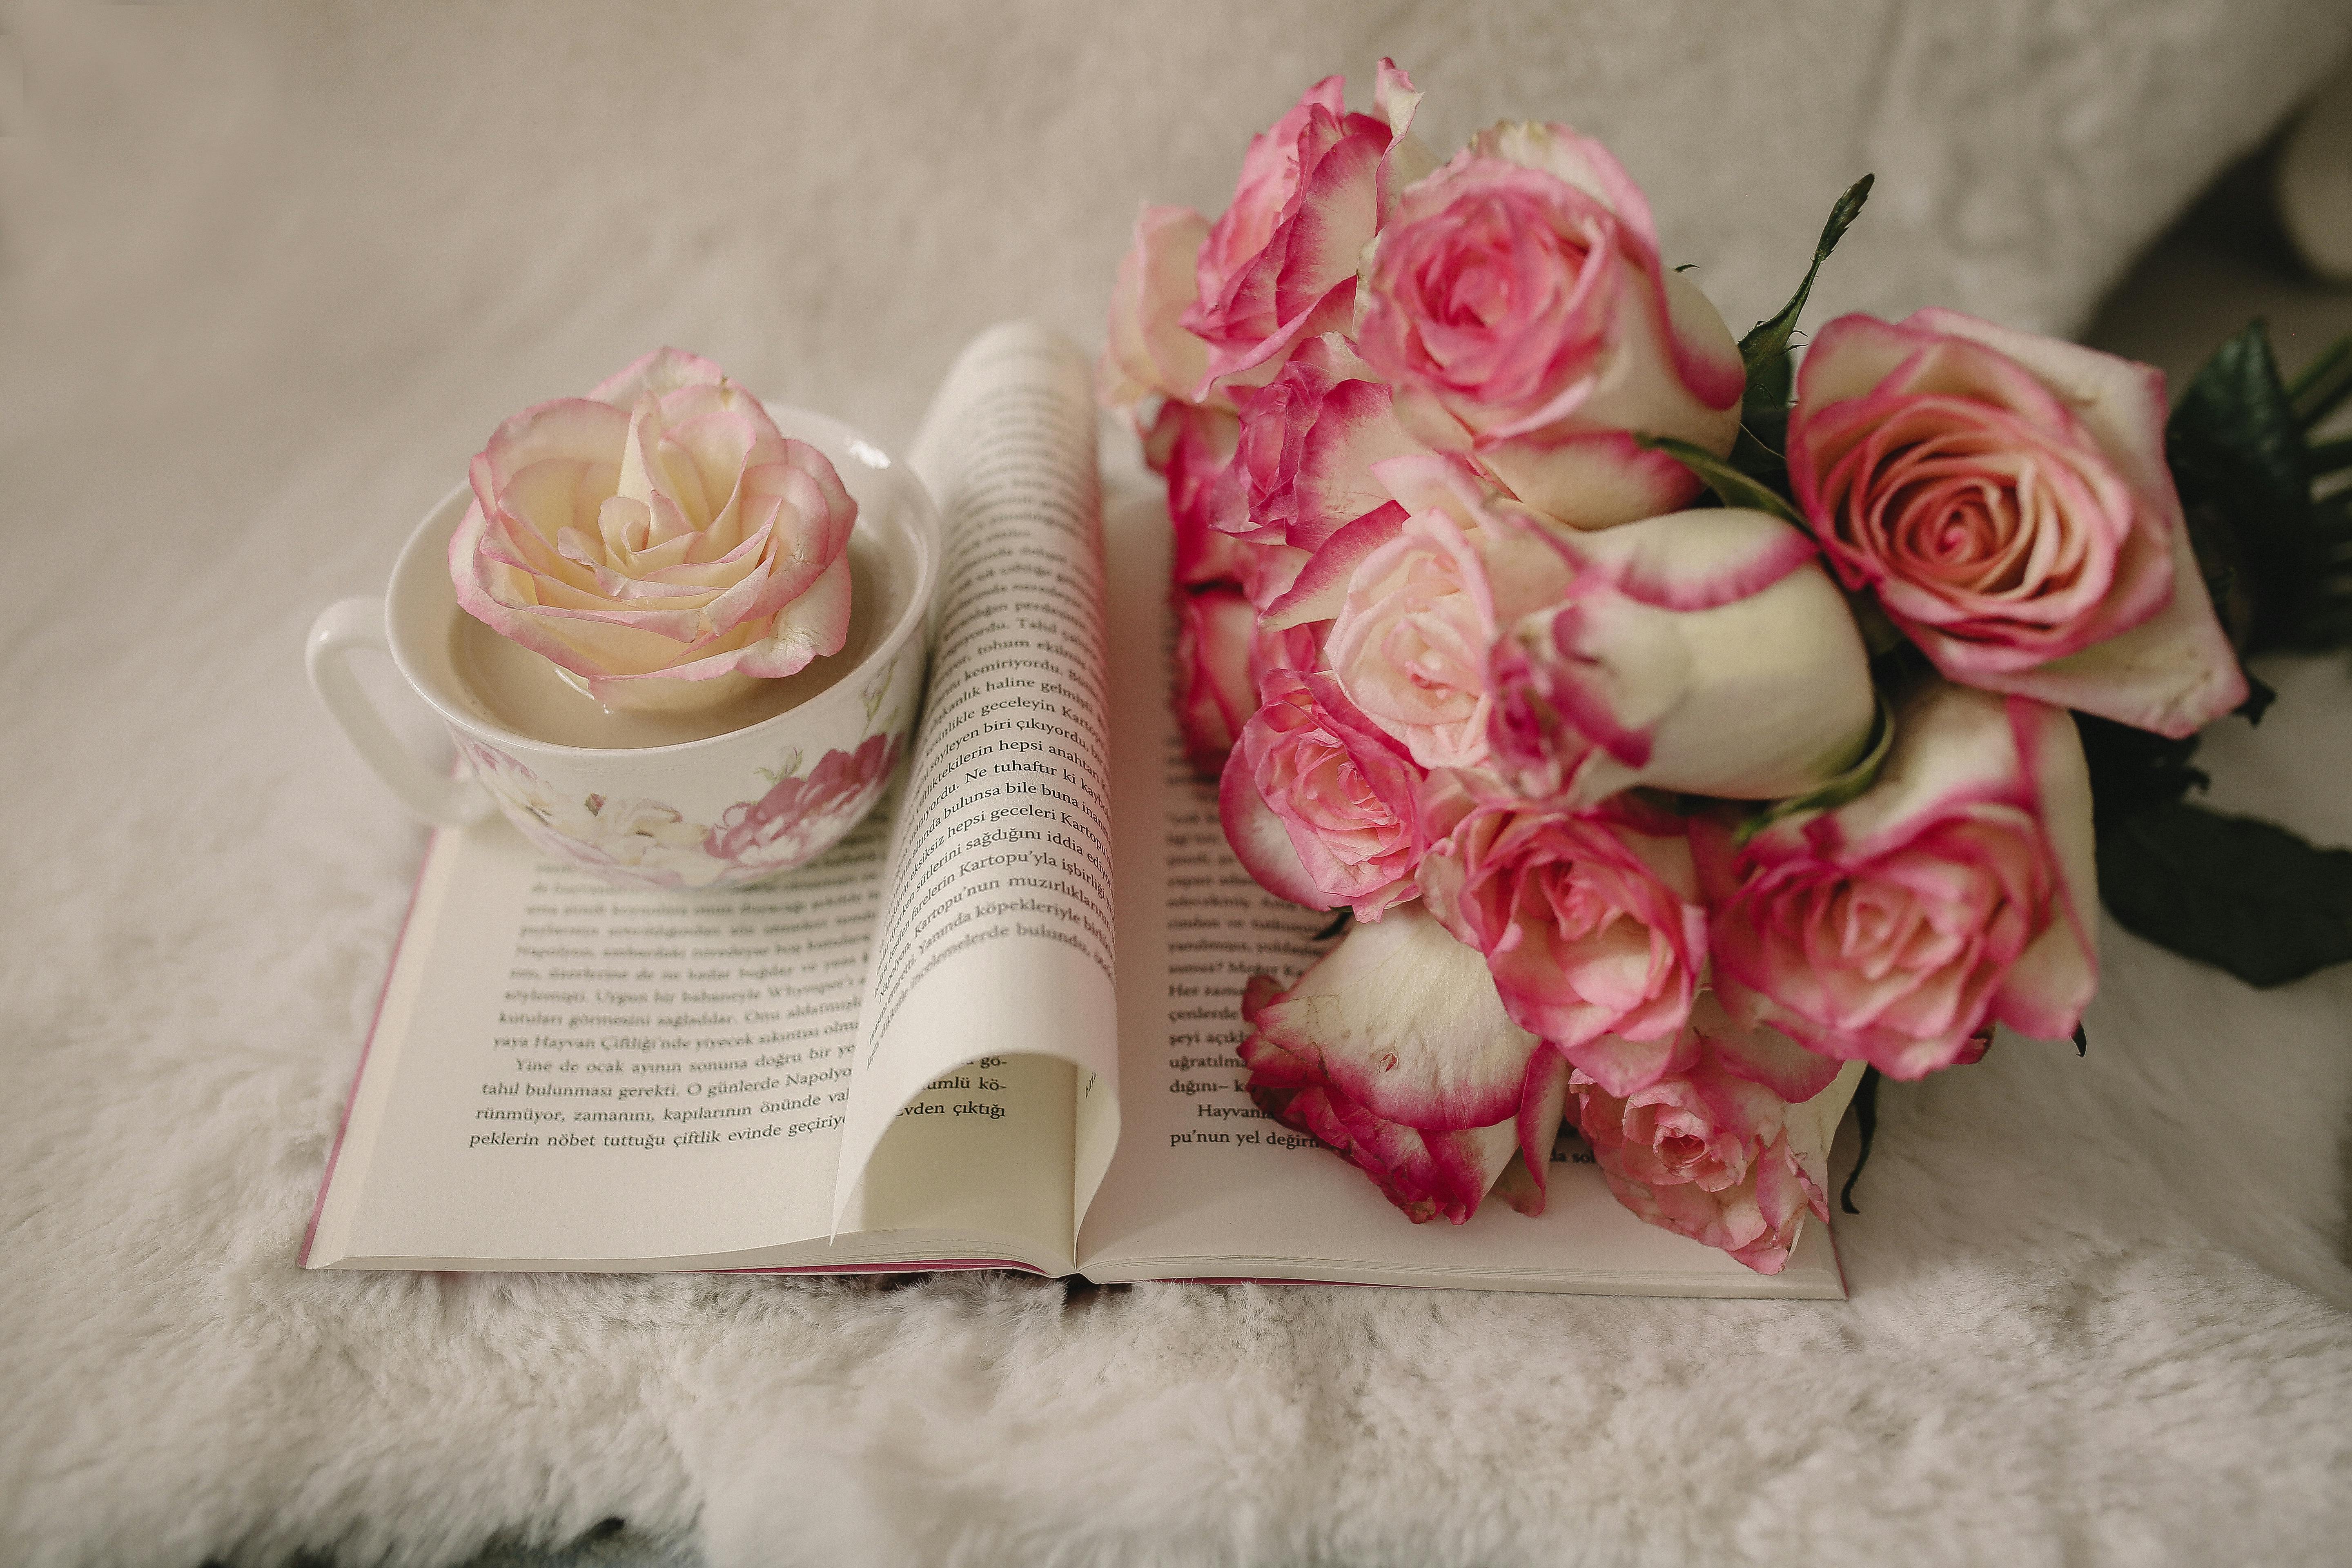 flowers on book and in cup